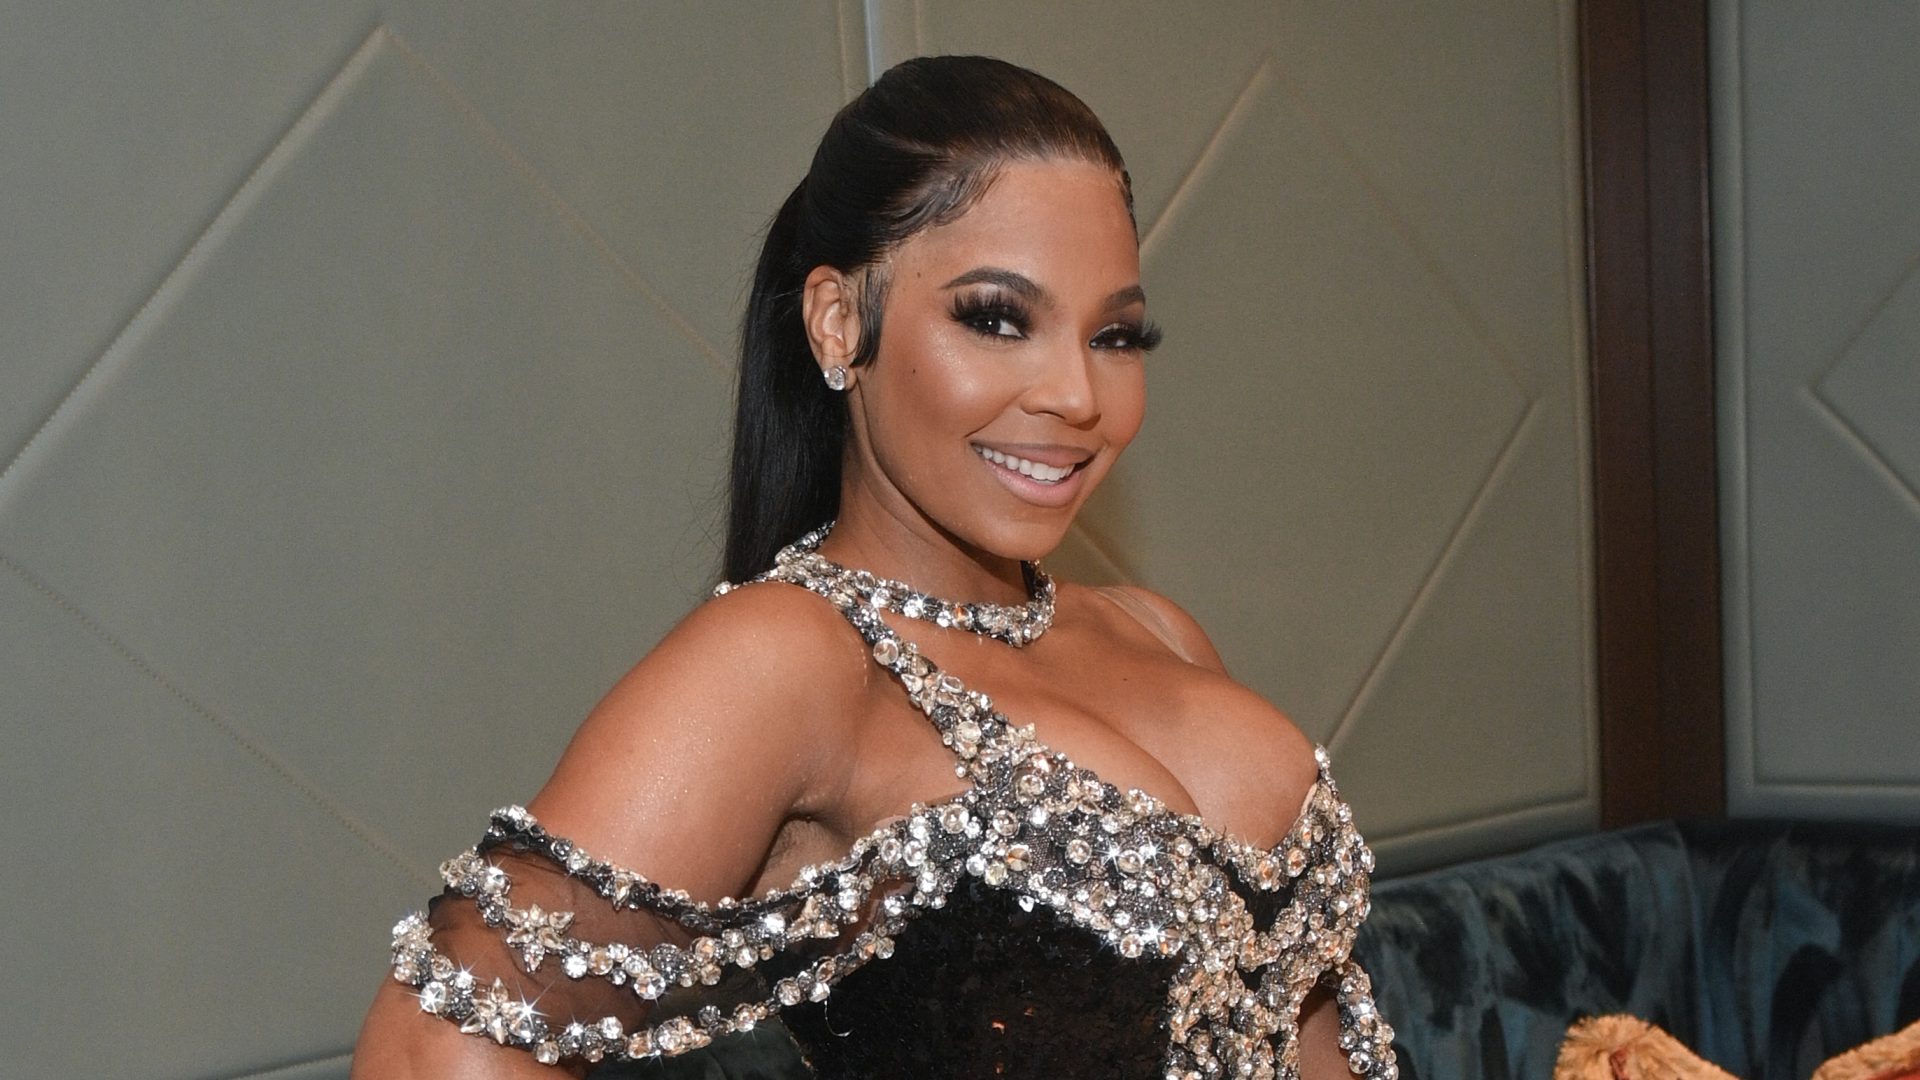 She's A Muva! Ashanti Gives Fans A Closer Look At Her Baby Bump (VIDEOS)